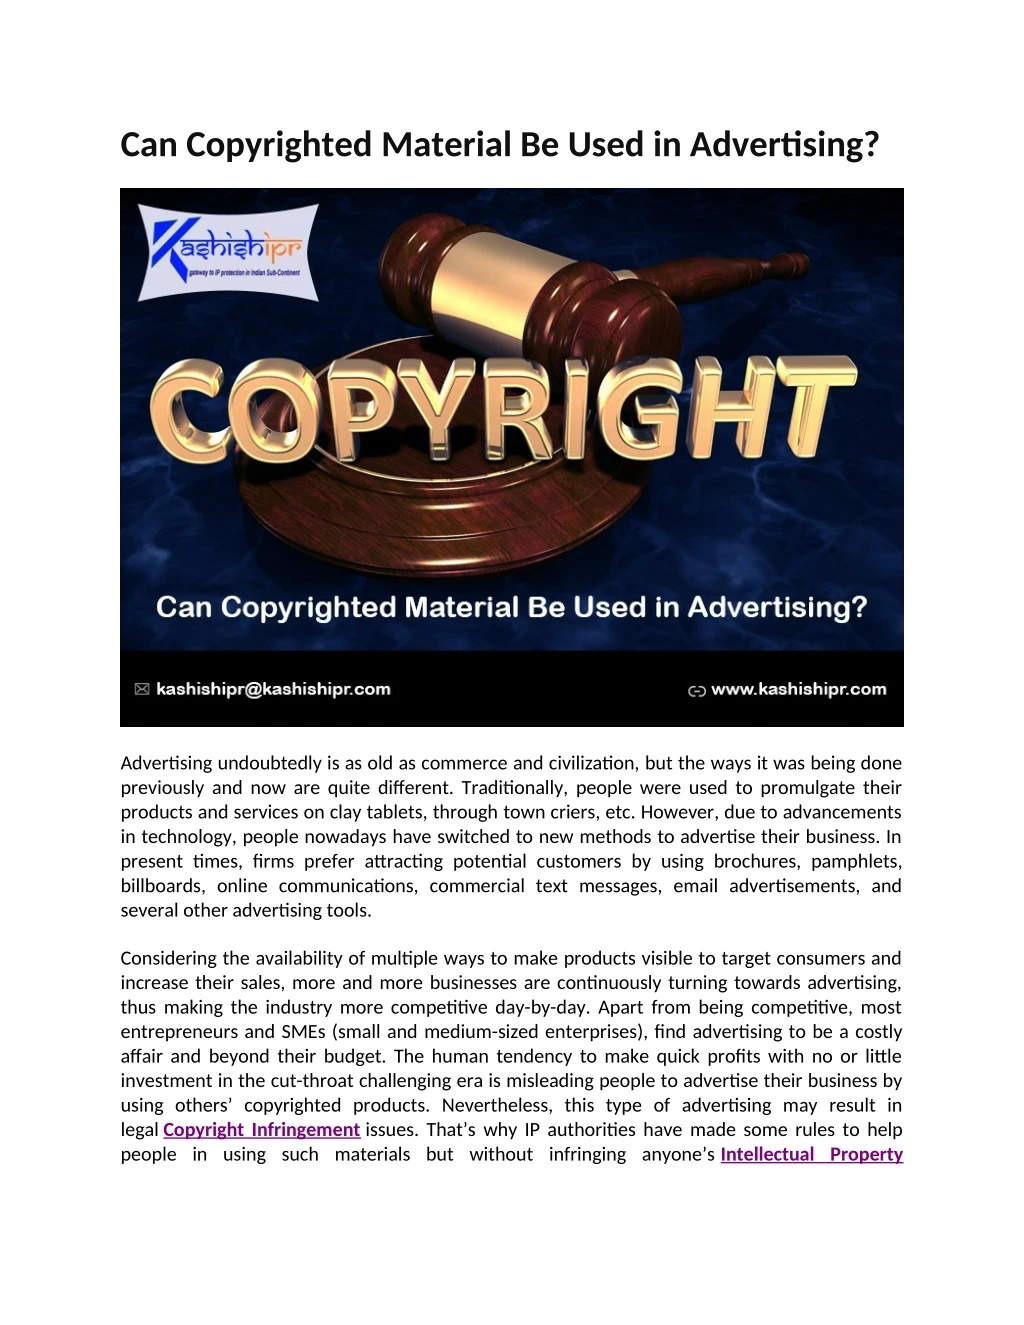 can copyrighted material be used in advertising